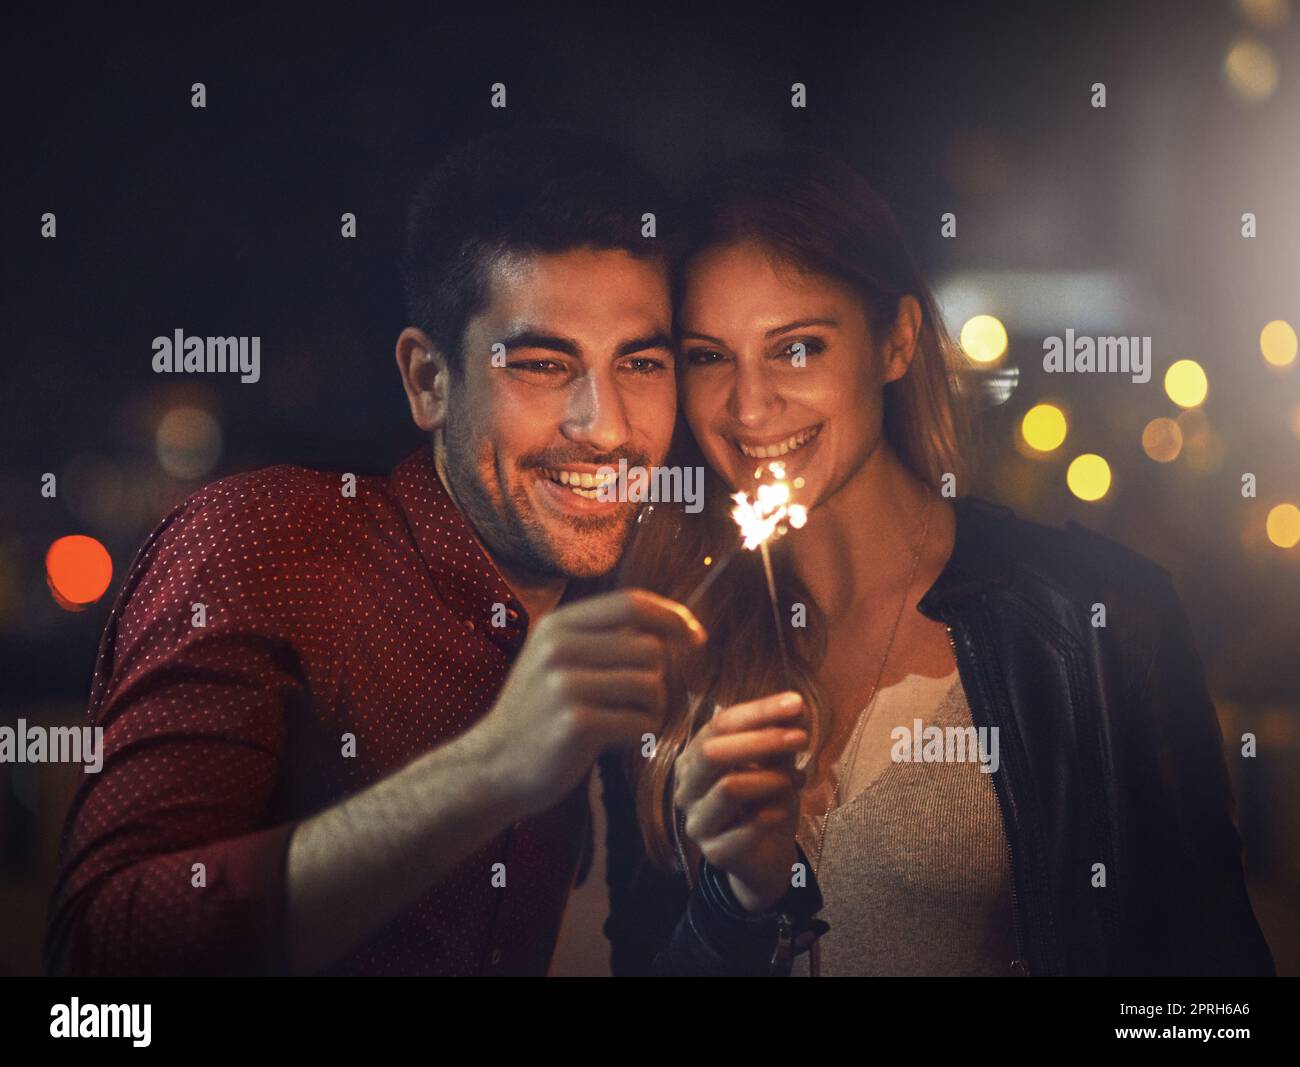 Find a love that makes you sparkle. a happy young couple celebrating with sparklers outside at night. Stock Photo